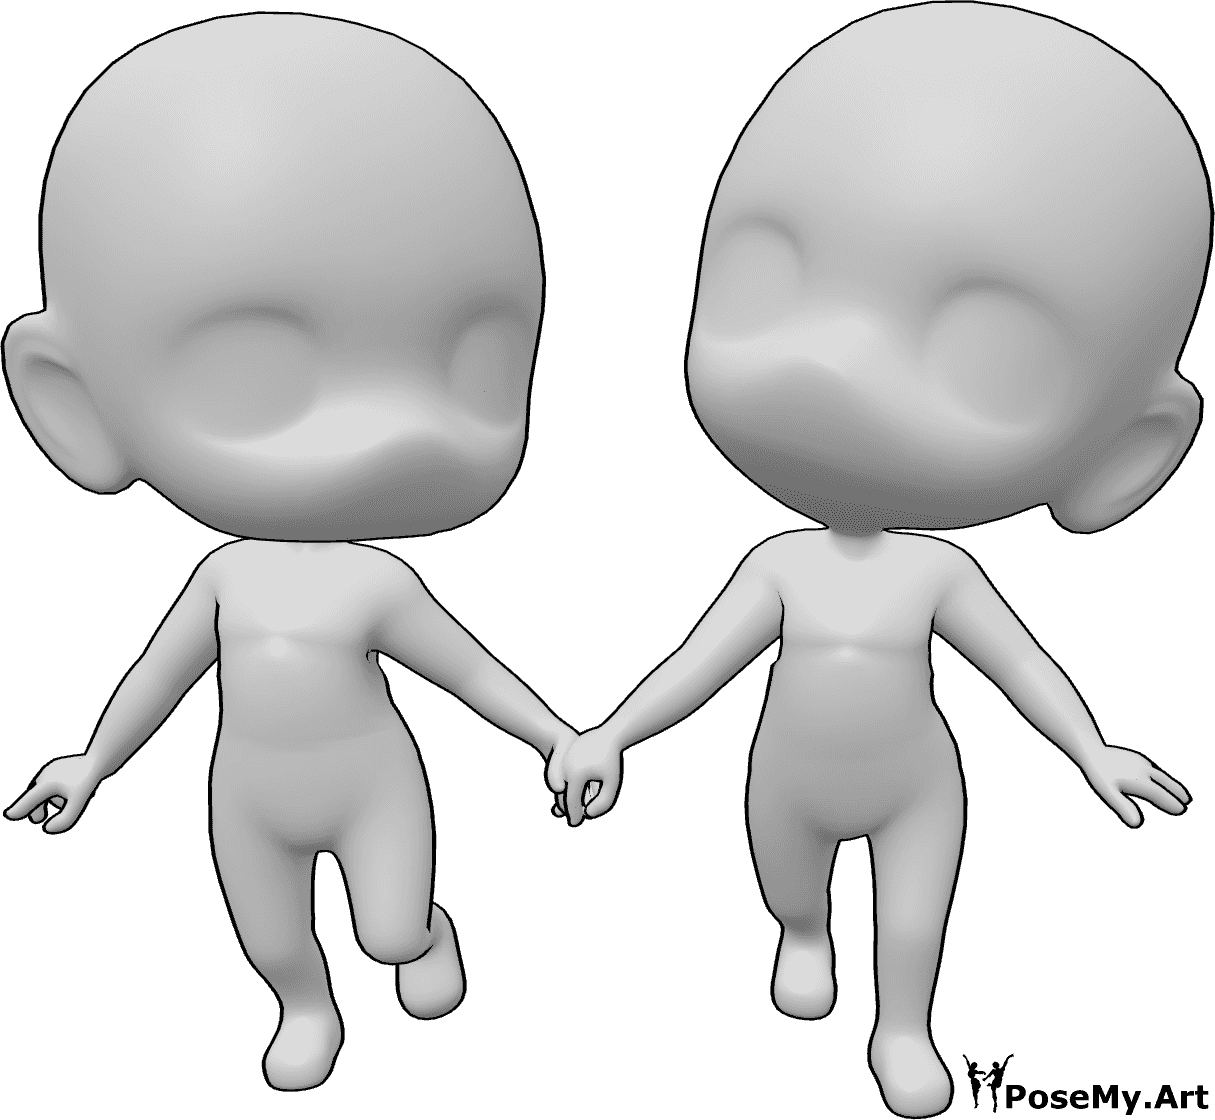 Pose Reference - Happy chibis walking pose - Two chibi is walking together happily and holding each others hands